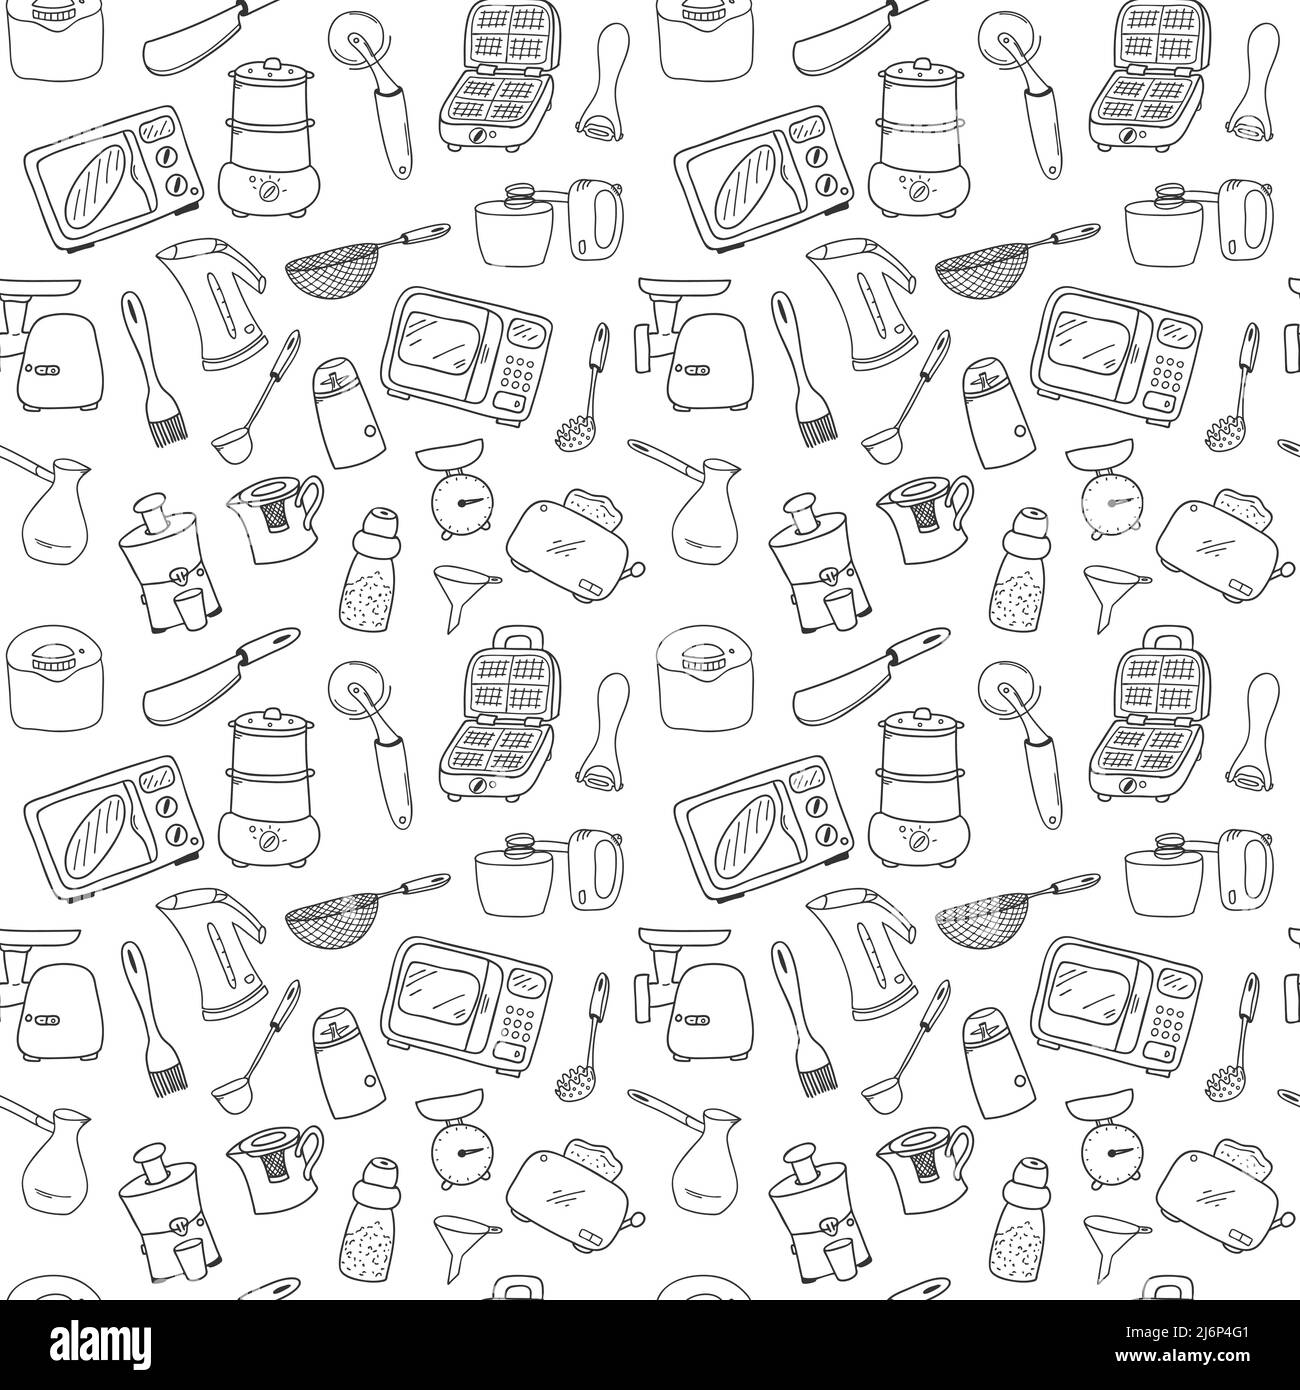 Seamless pattern with elements of kitchen utensils, utensils and appliances. Black-white background for menu design,brochures, web pages. Doodle illus Stock Vector